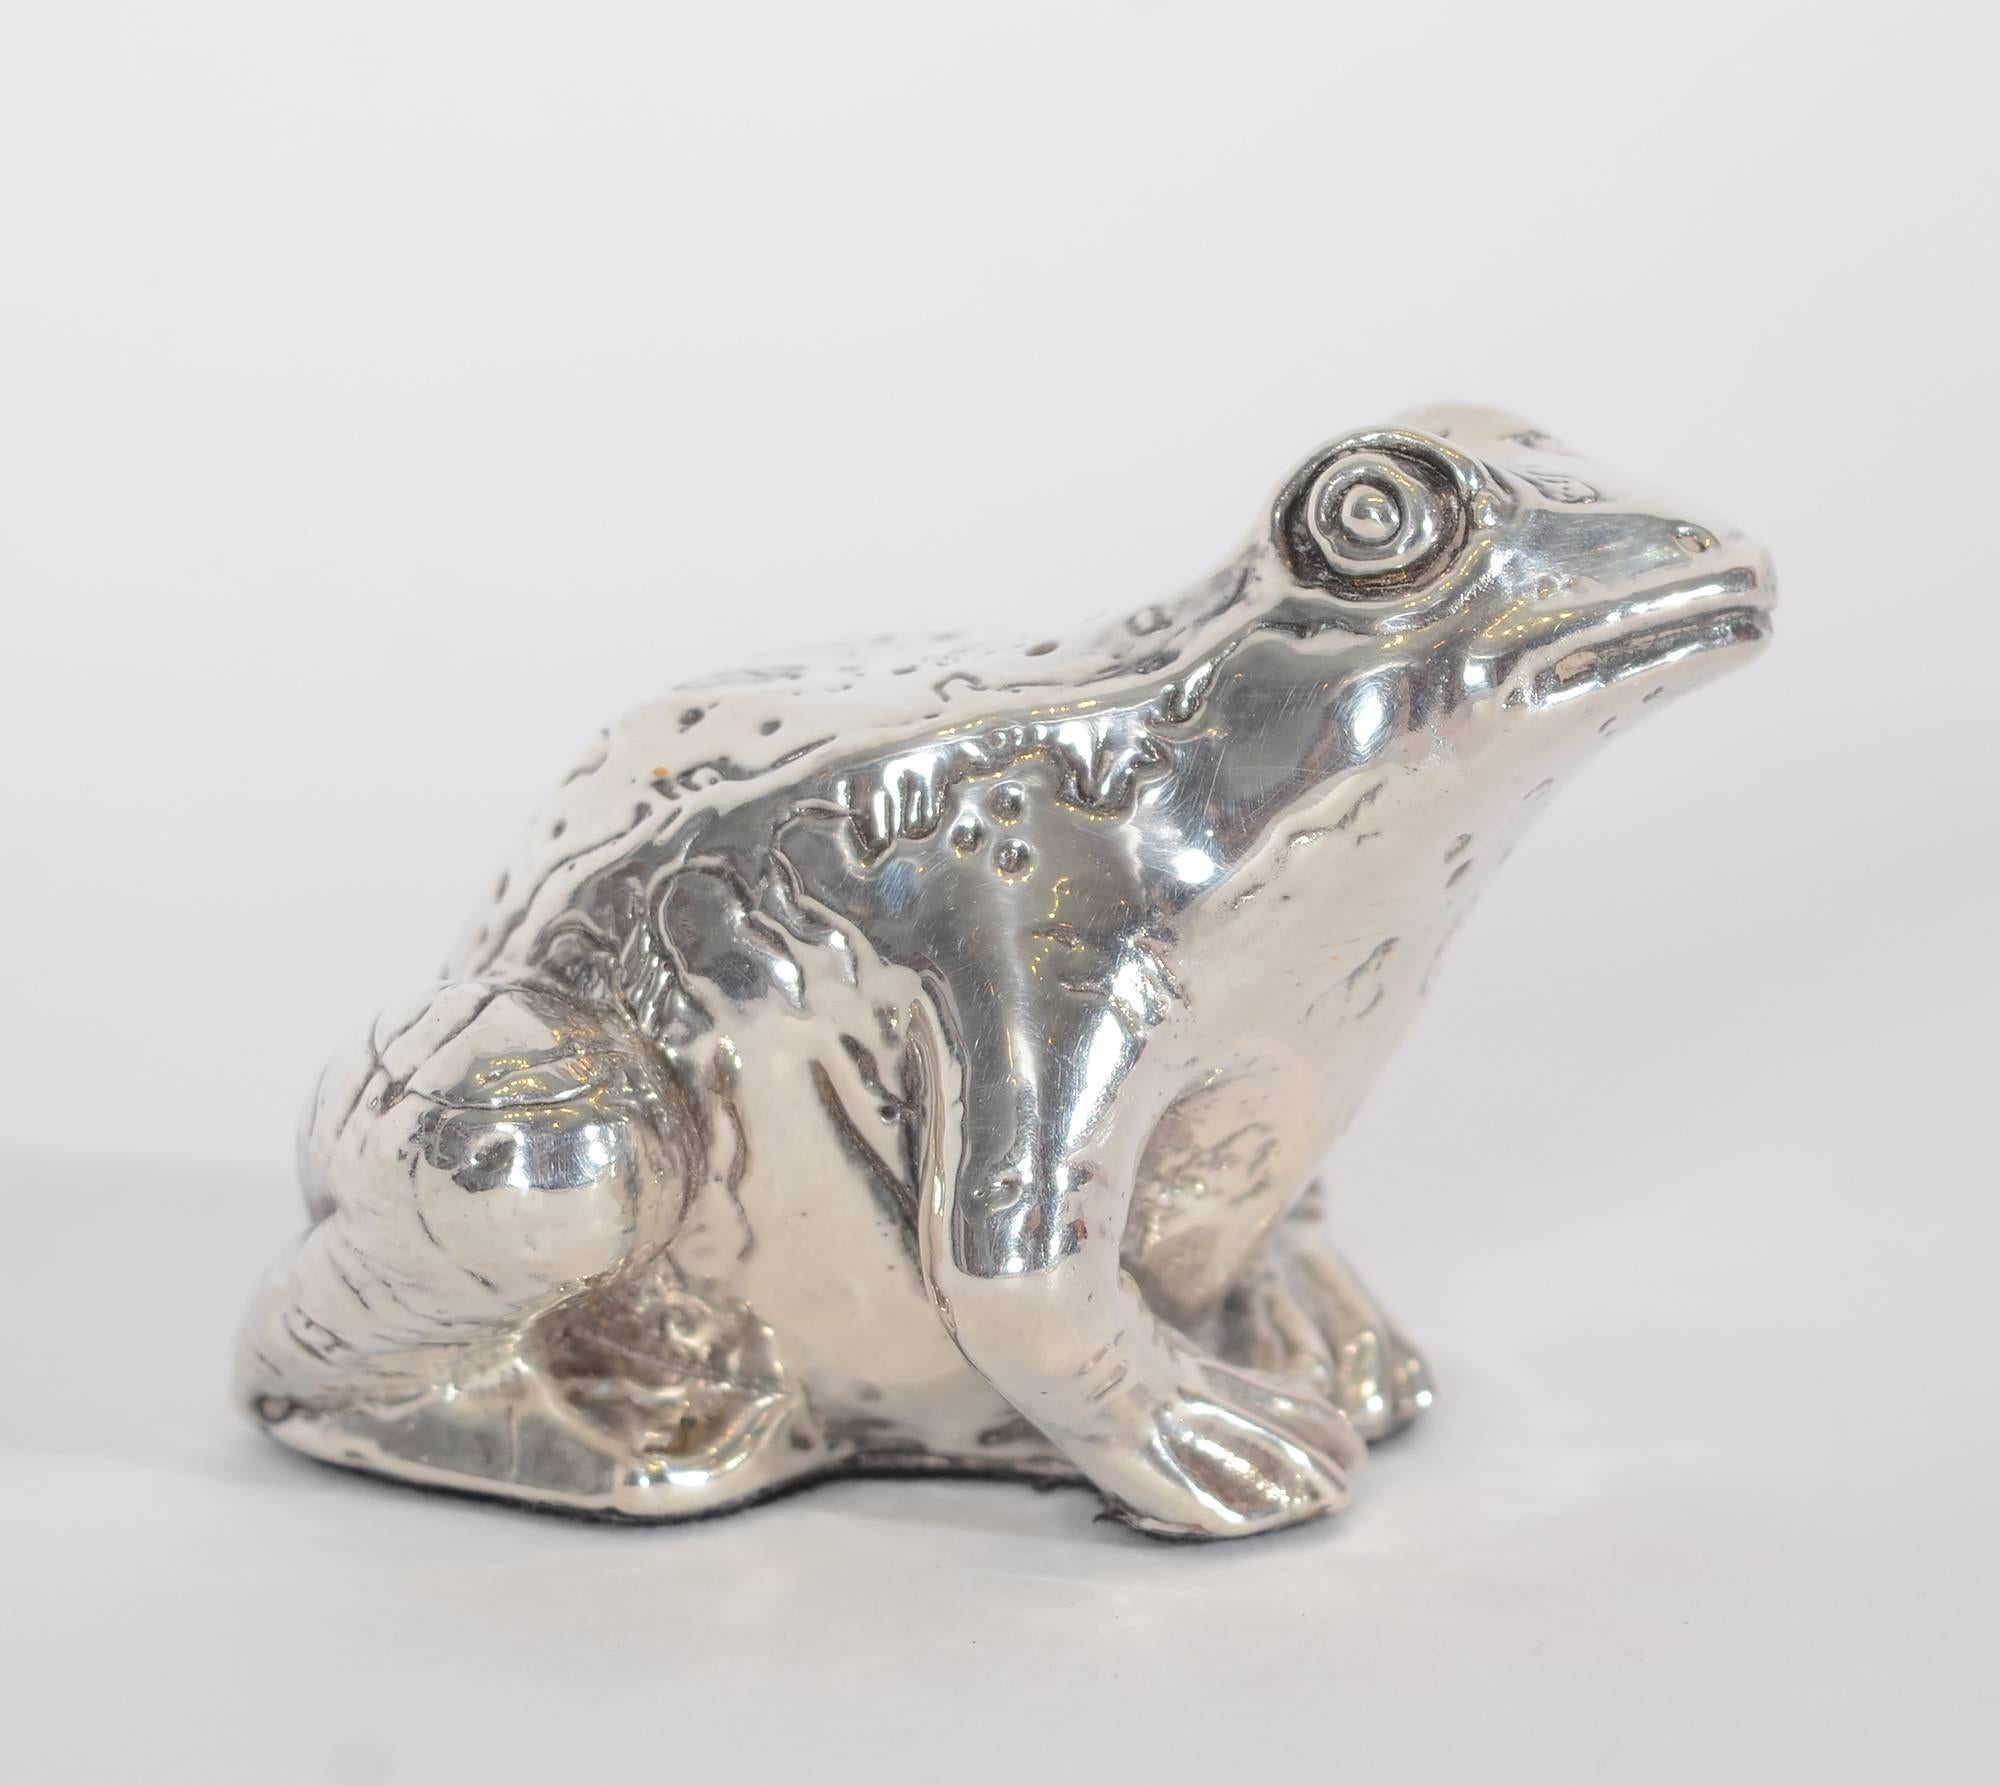 This charming  tabletop toad would amuse any frog collector. It is nicely textured  and  has a happy look. The frog measures 1 15/16